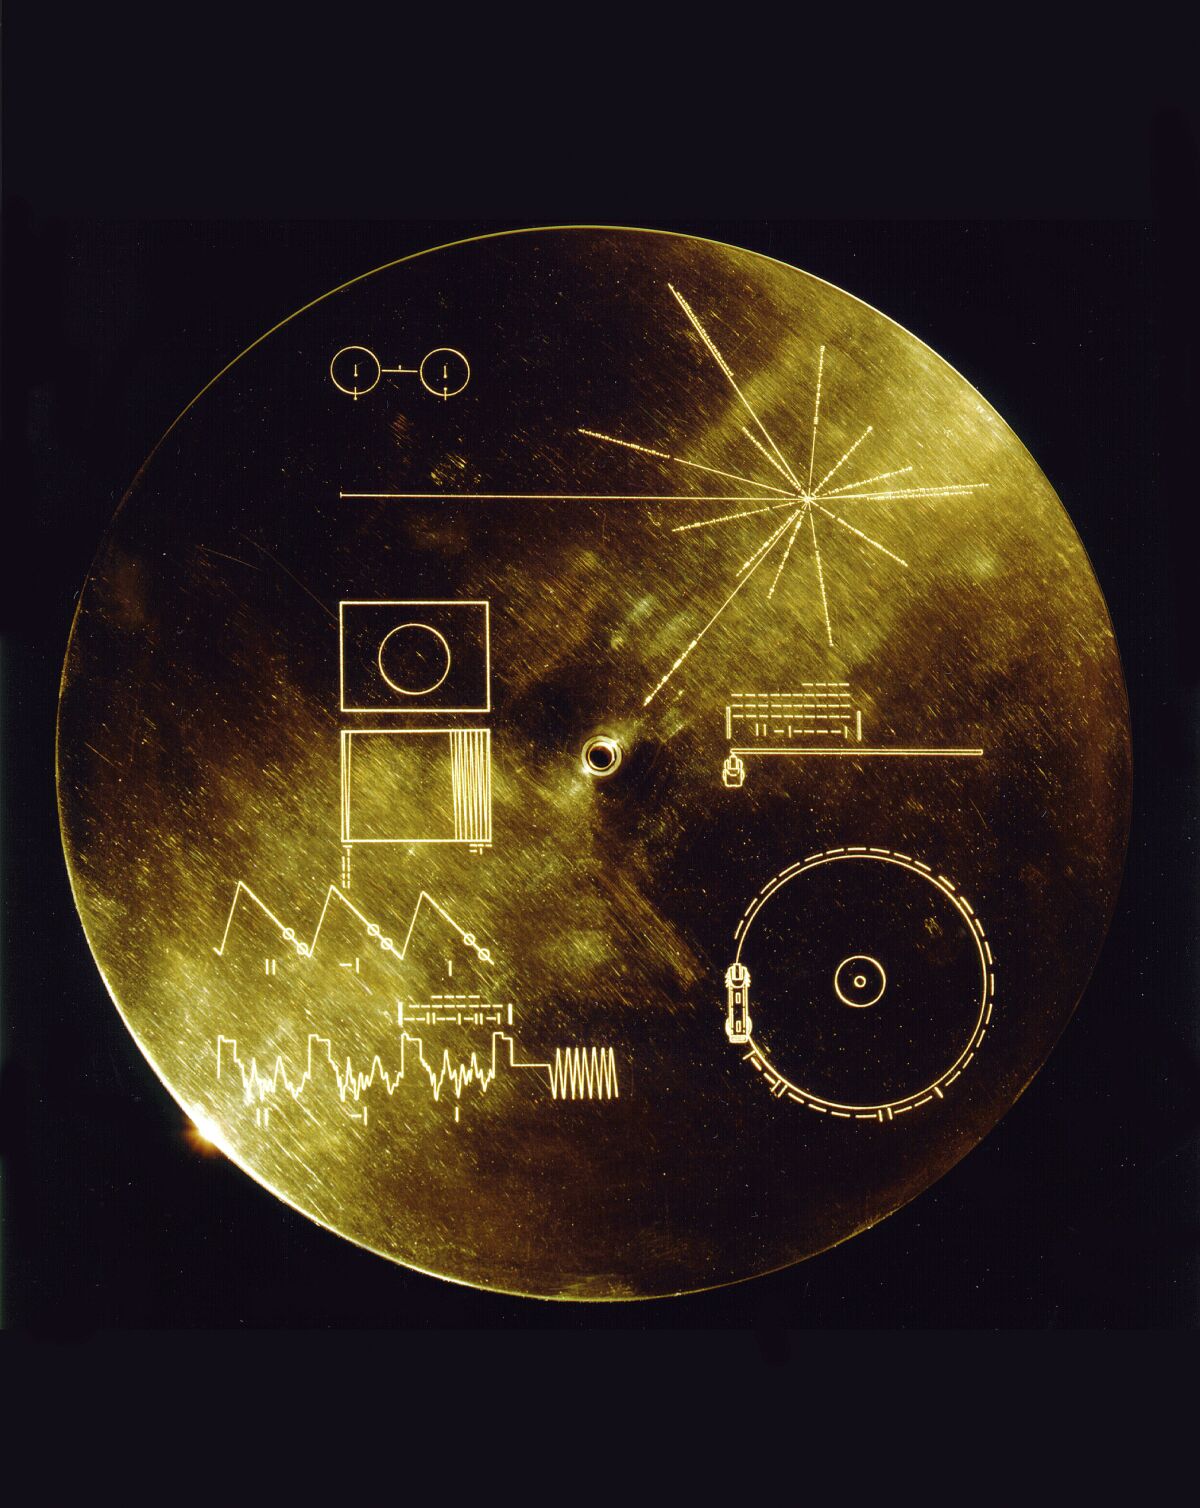 Voyager's "Sounds of Earth" 